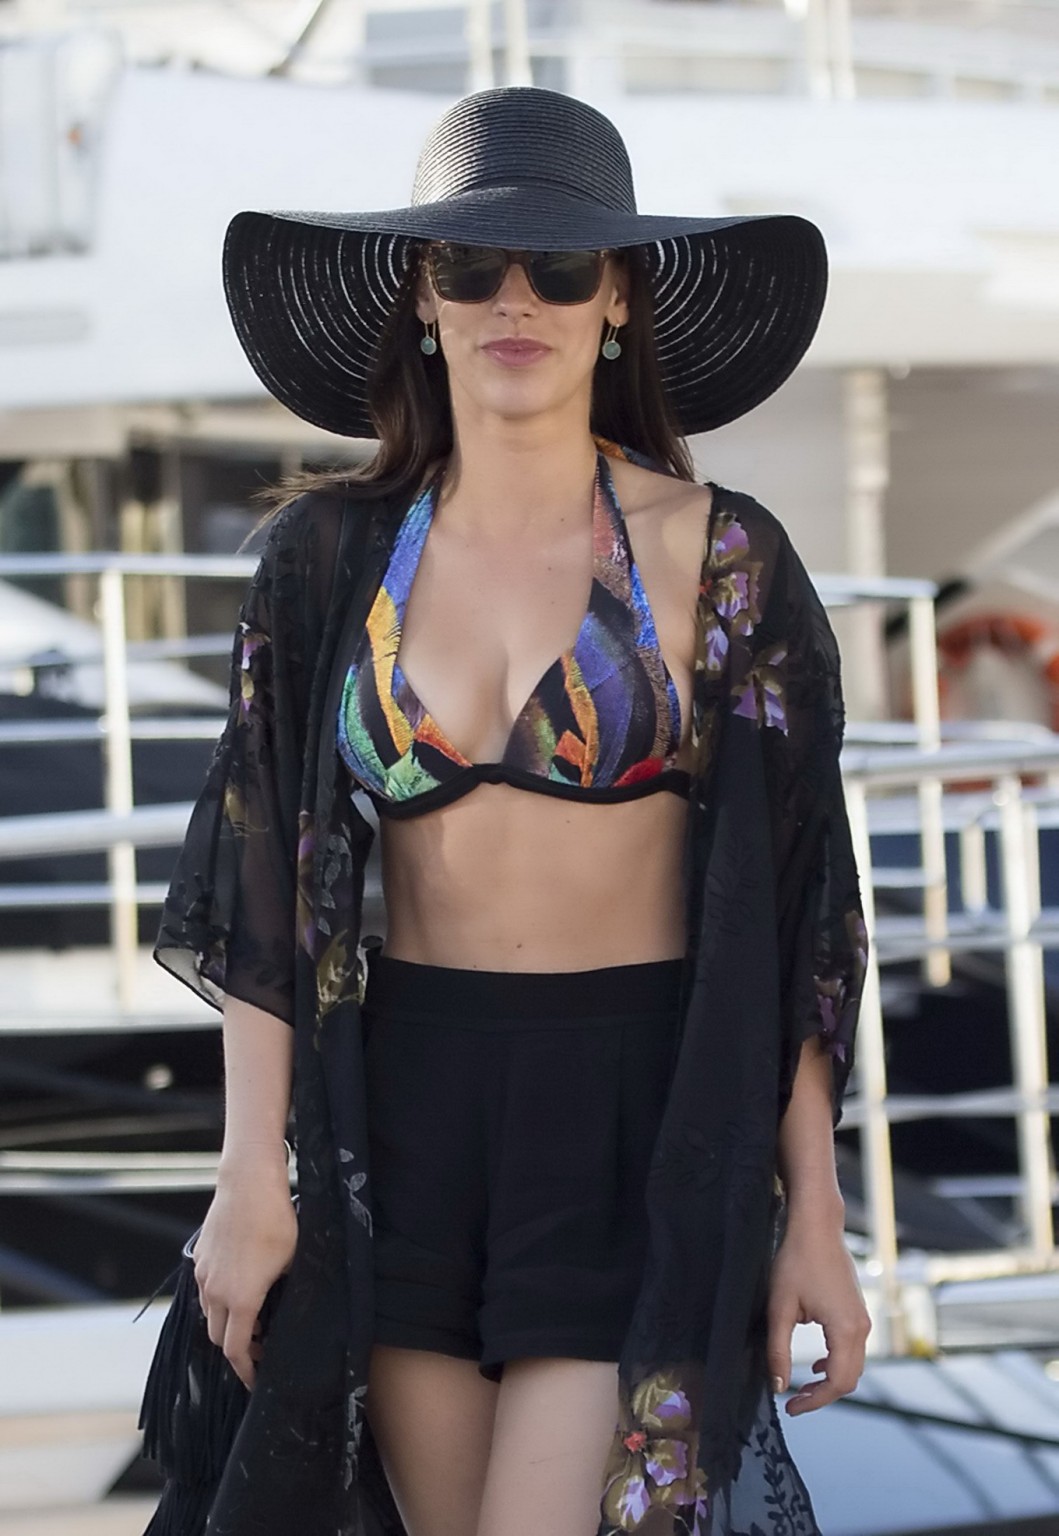 Jessica Lowndes busty and leggy in a tiny colorful bikini top and shorts out in  #75163659